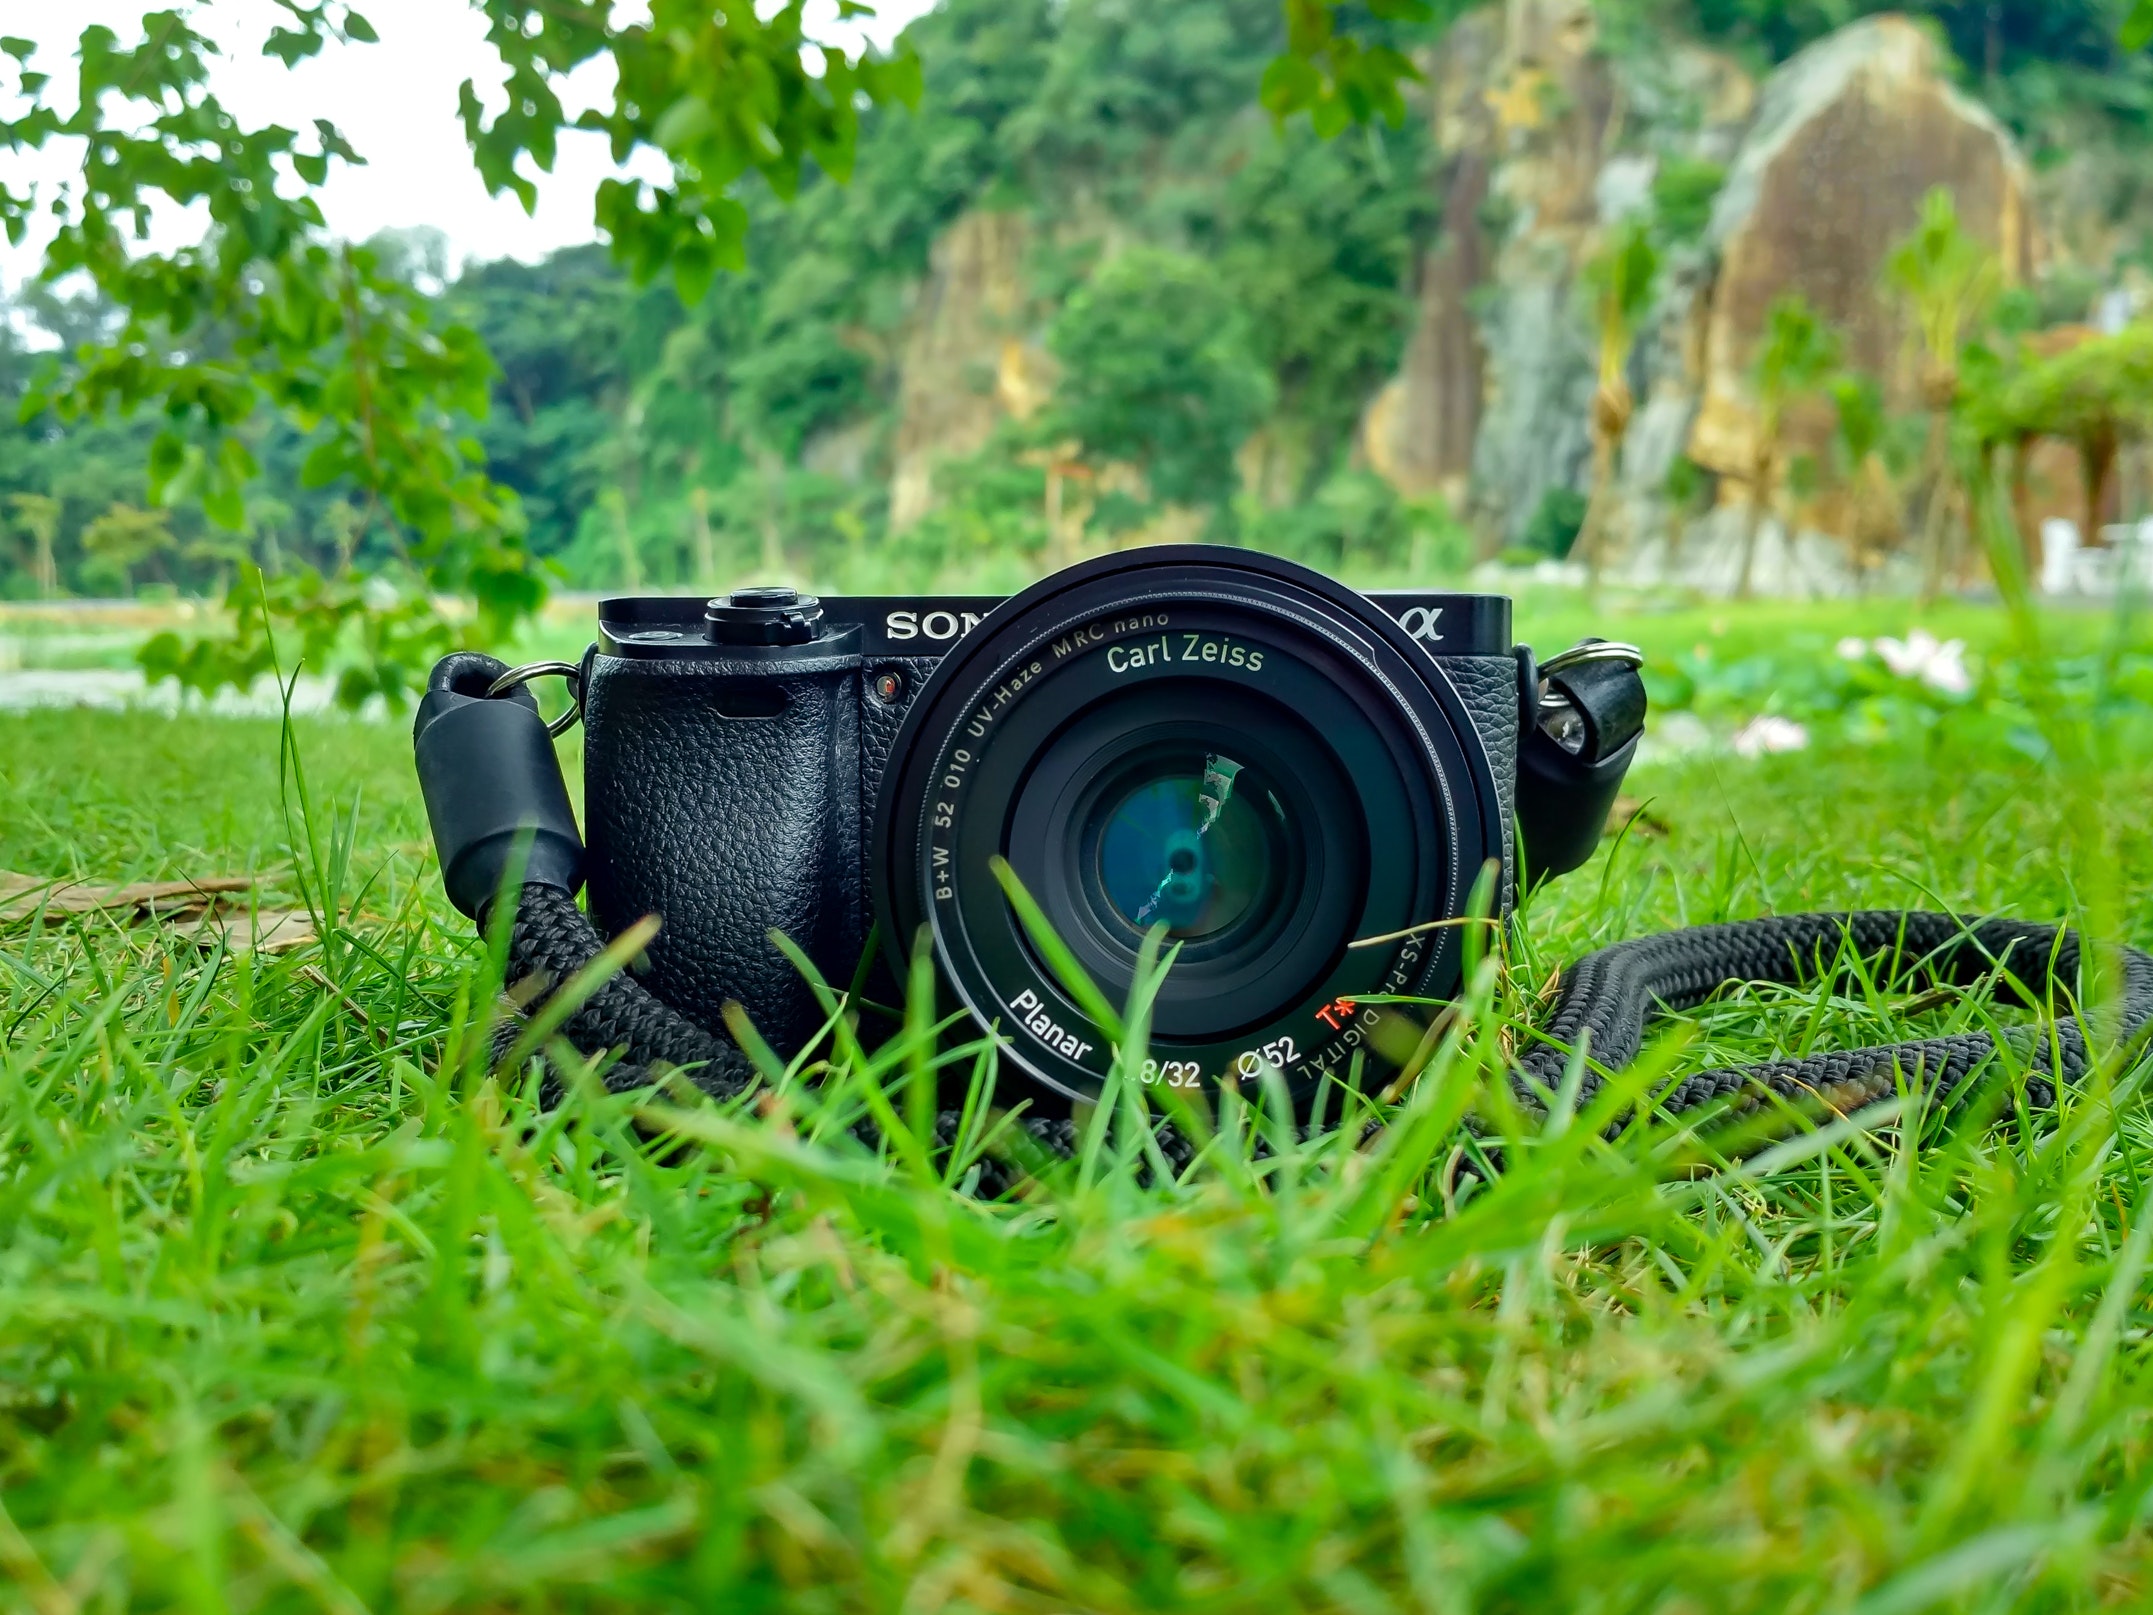 Black sony dslr camera on green grass in front of brown and green mountain photo